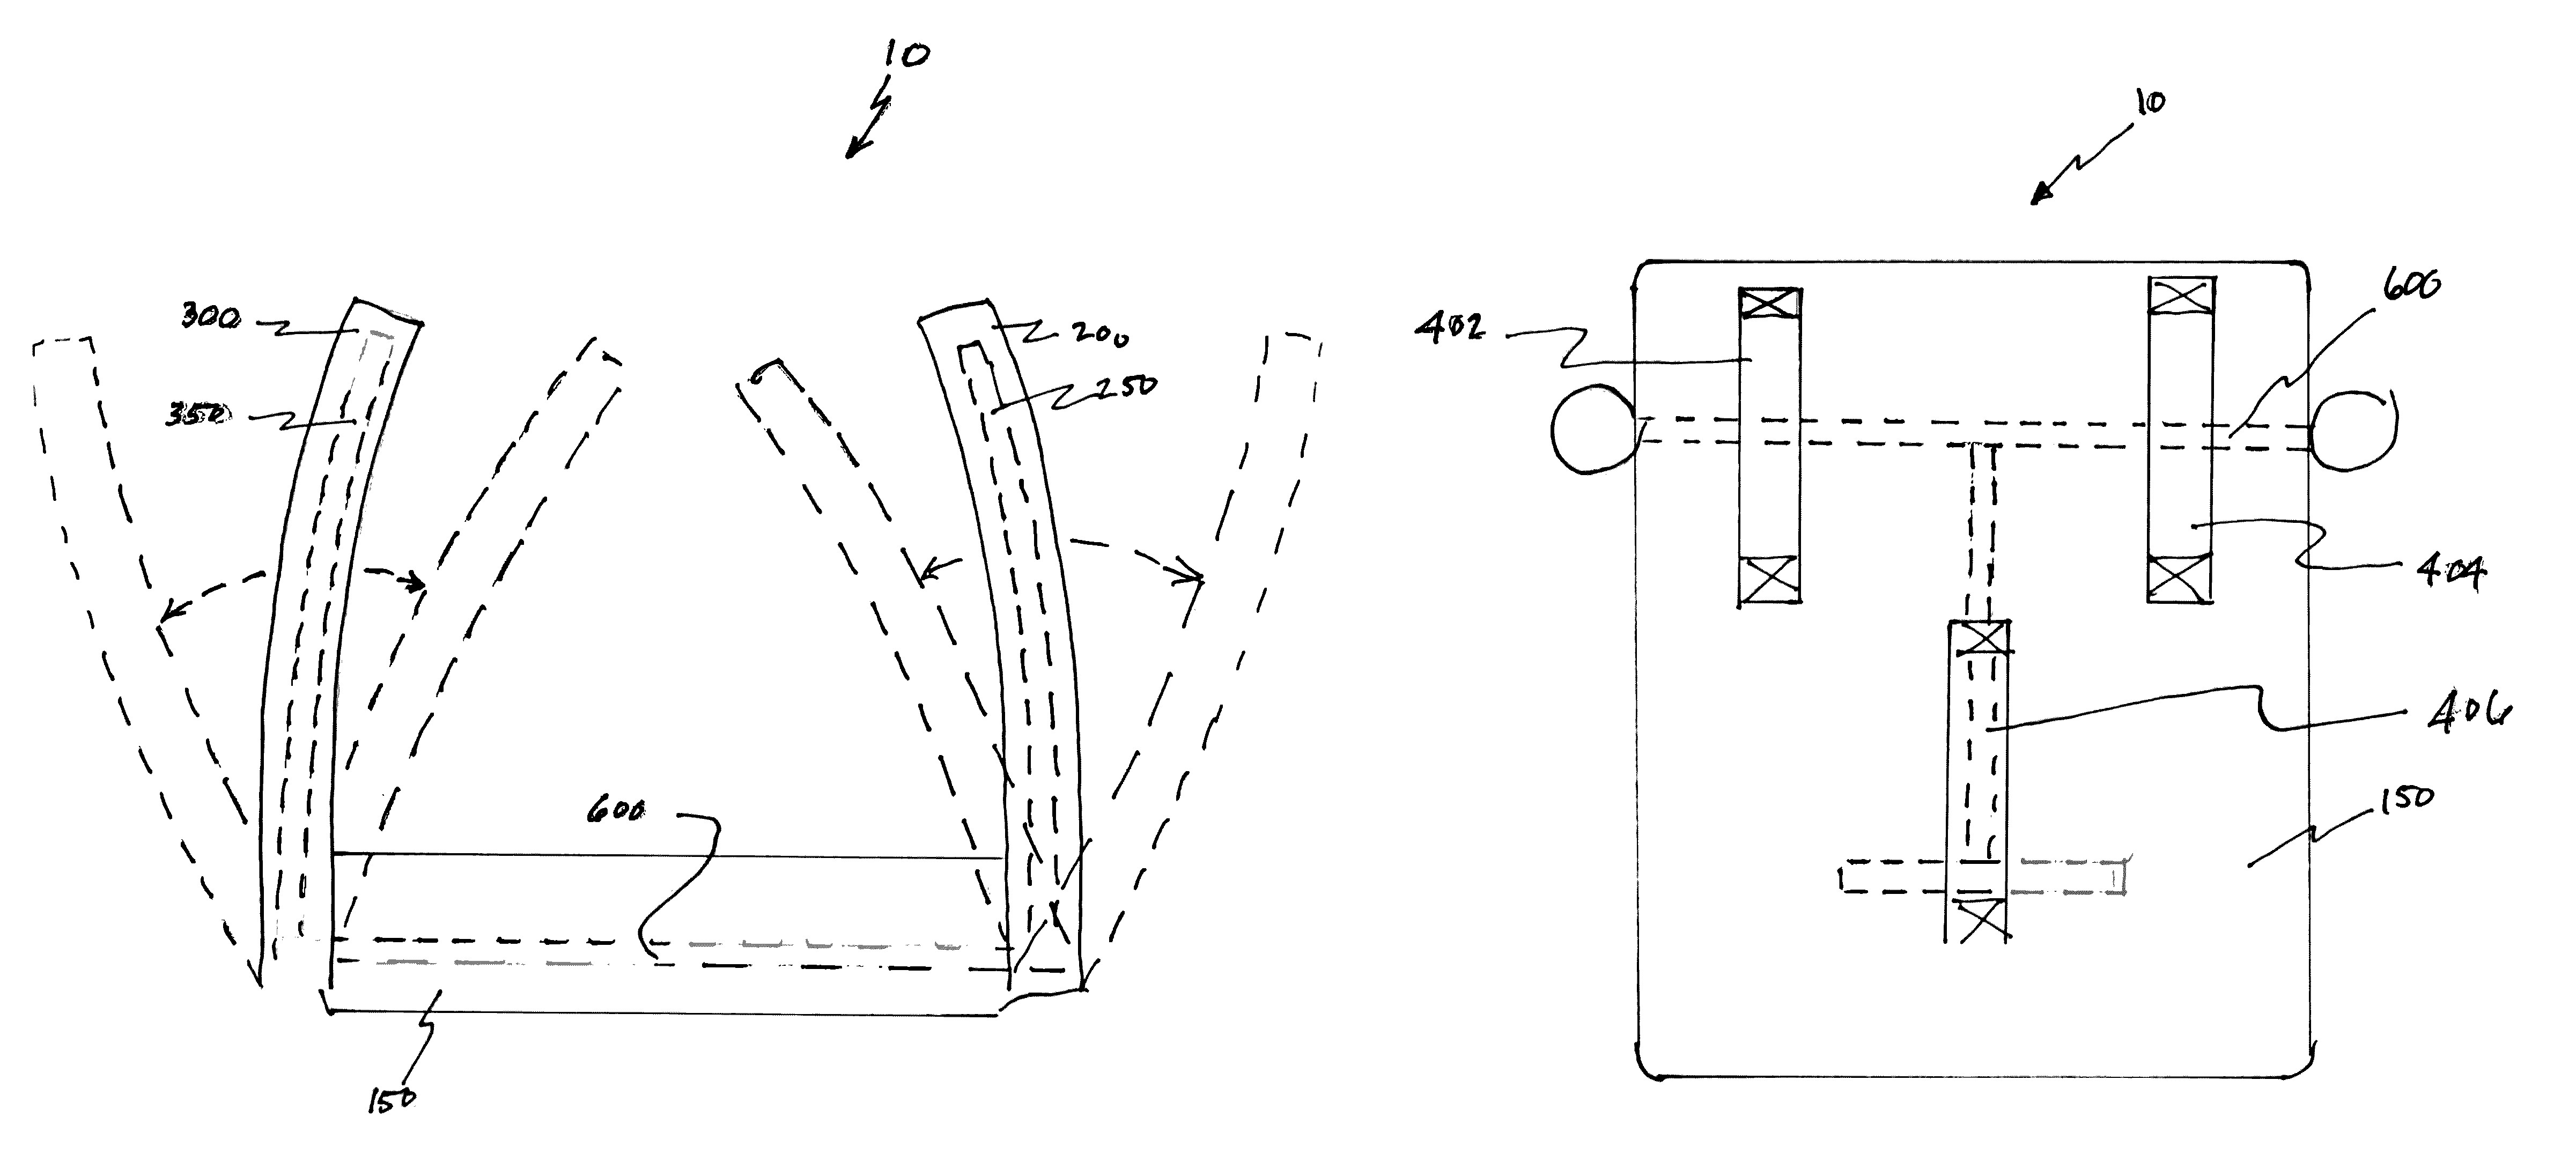 Apparatus and method for athletic training